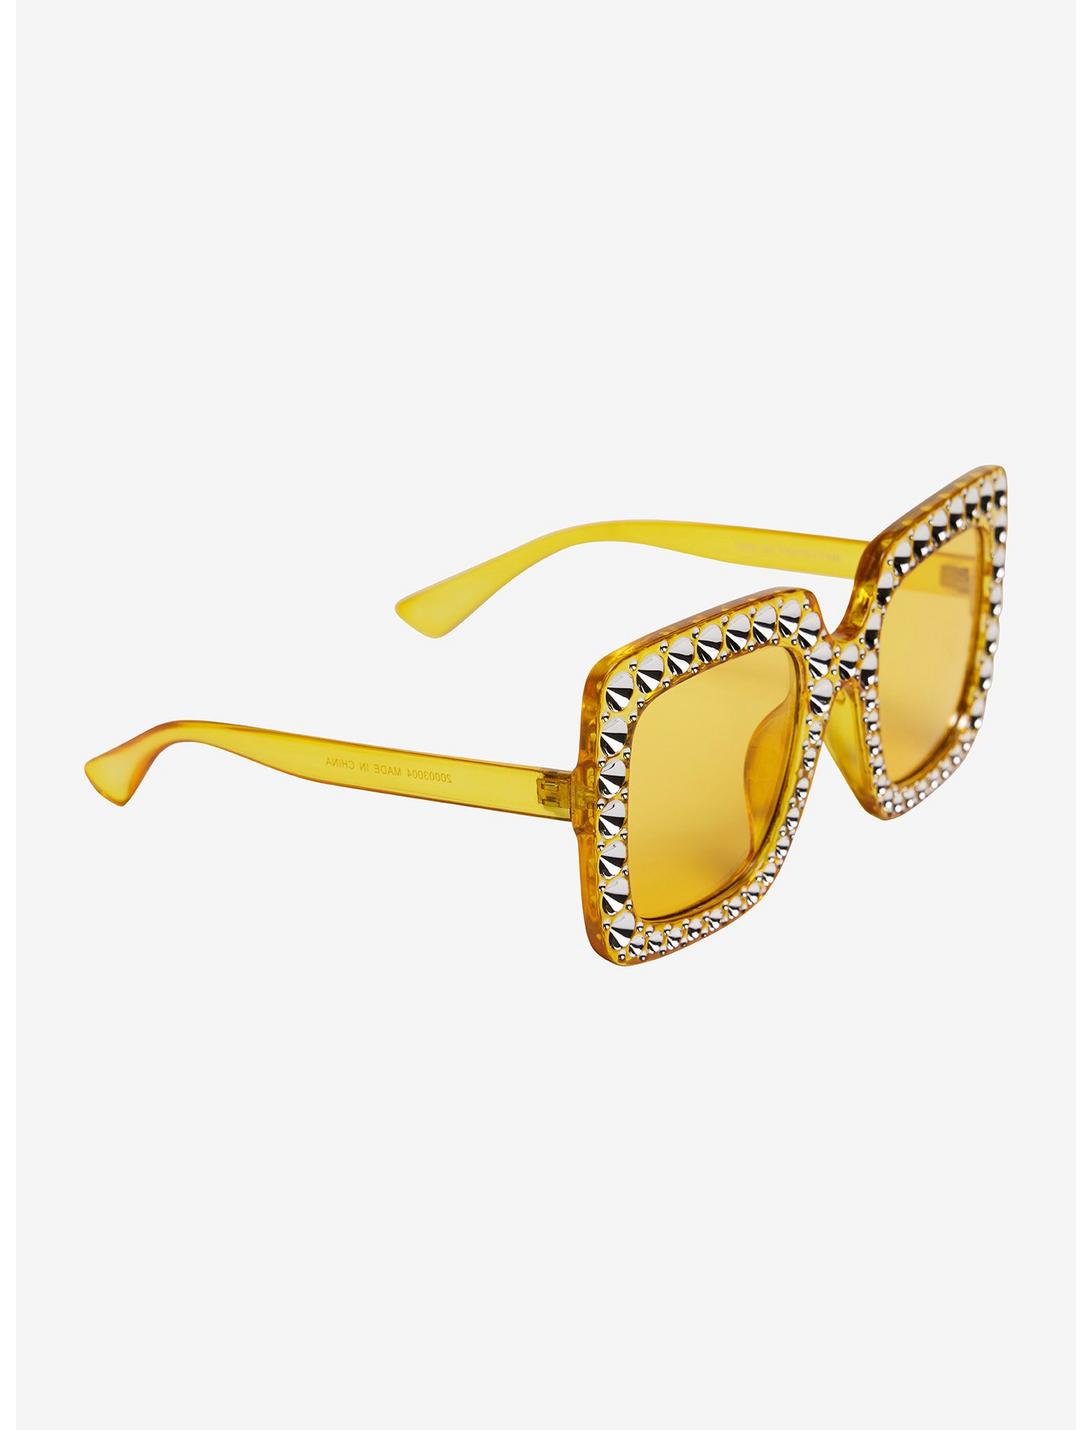 Bitterhed forbruger Uafhængighed Yellow Oversized Rhinestone Sunglasses | Hot Topic